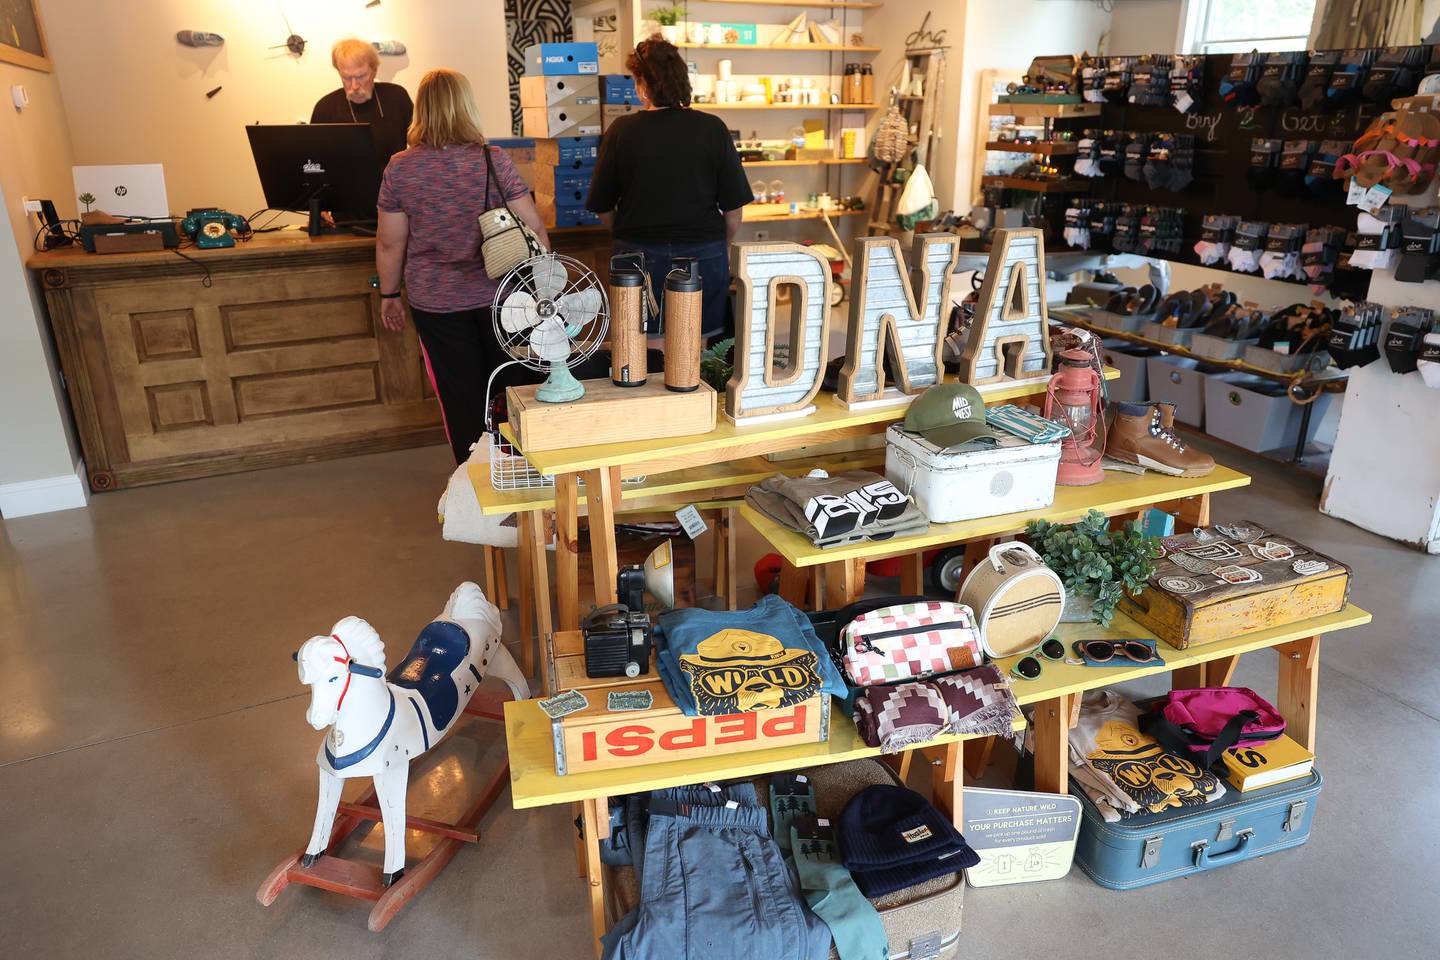 DNA - Active Lifestyle Outfitter in Downtown Plainfield specializes in active wear and accessories.